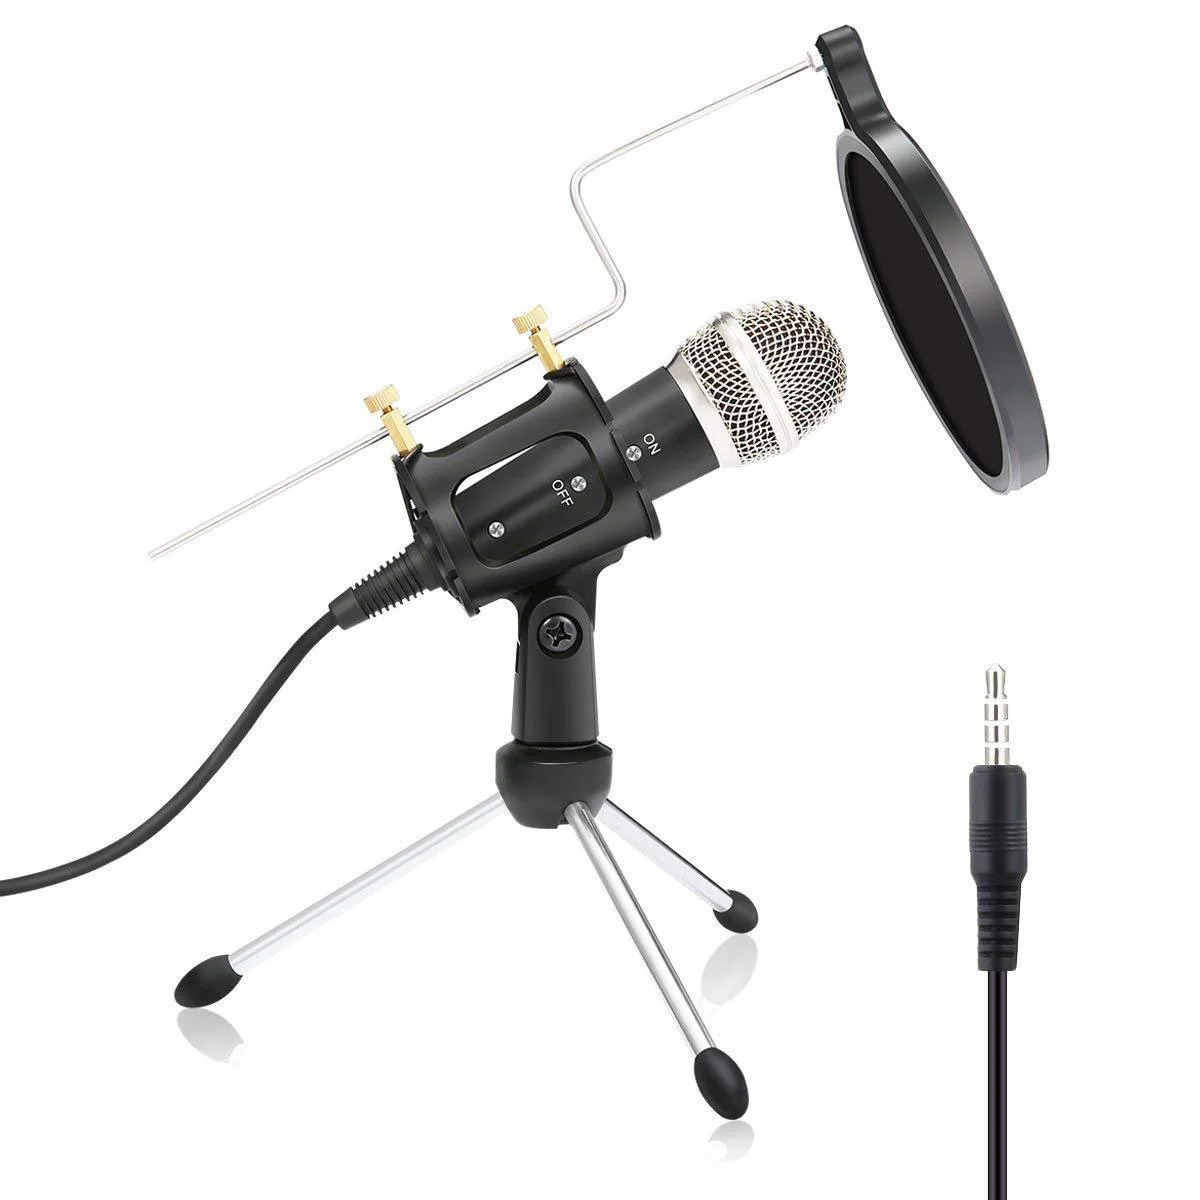 

LAIMODA 3.5mm Mobile Tripod Microphones Condenser Youtube Microphone Studio Recording Pc Phone Wire Microphone_Stand, Black